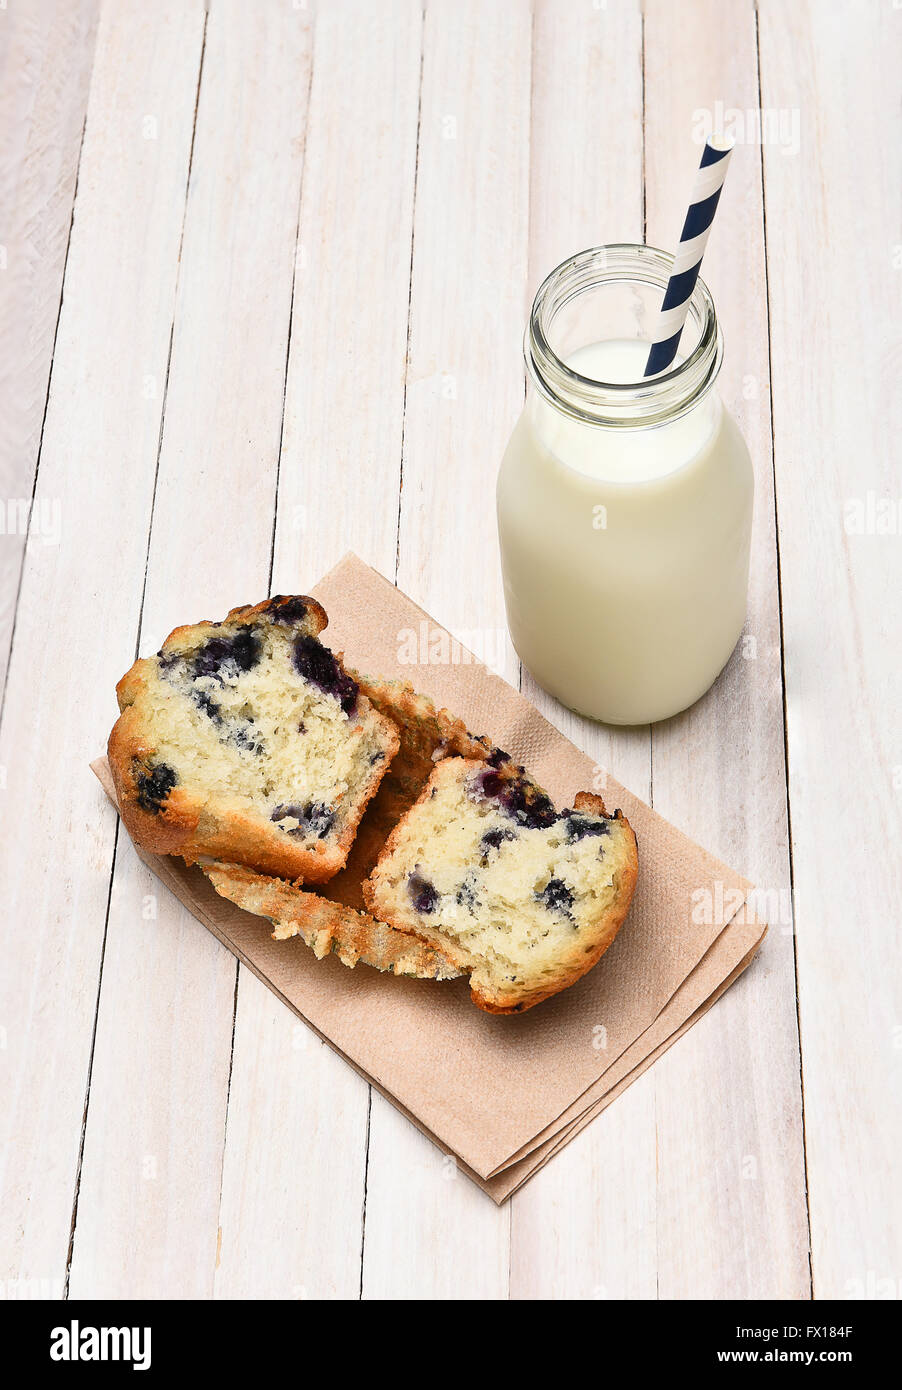 High angle view of a blueberry muffin and bottle of milk on a rustic white table. The muffin is broken in half on a napkin. Vert Stock Photo